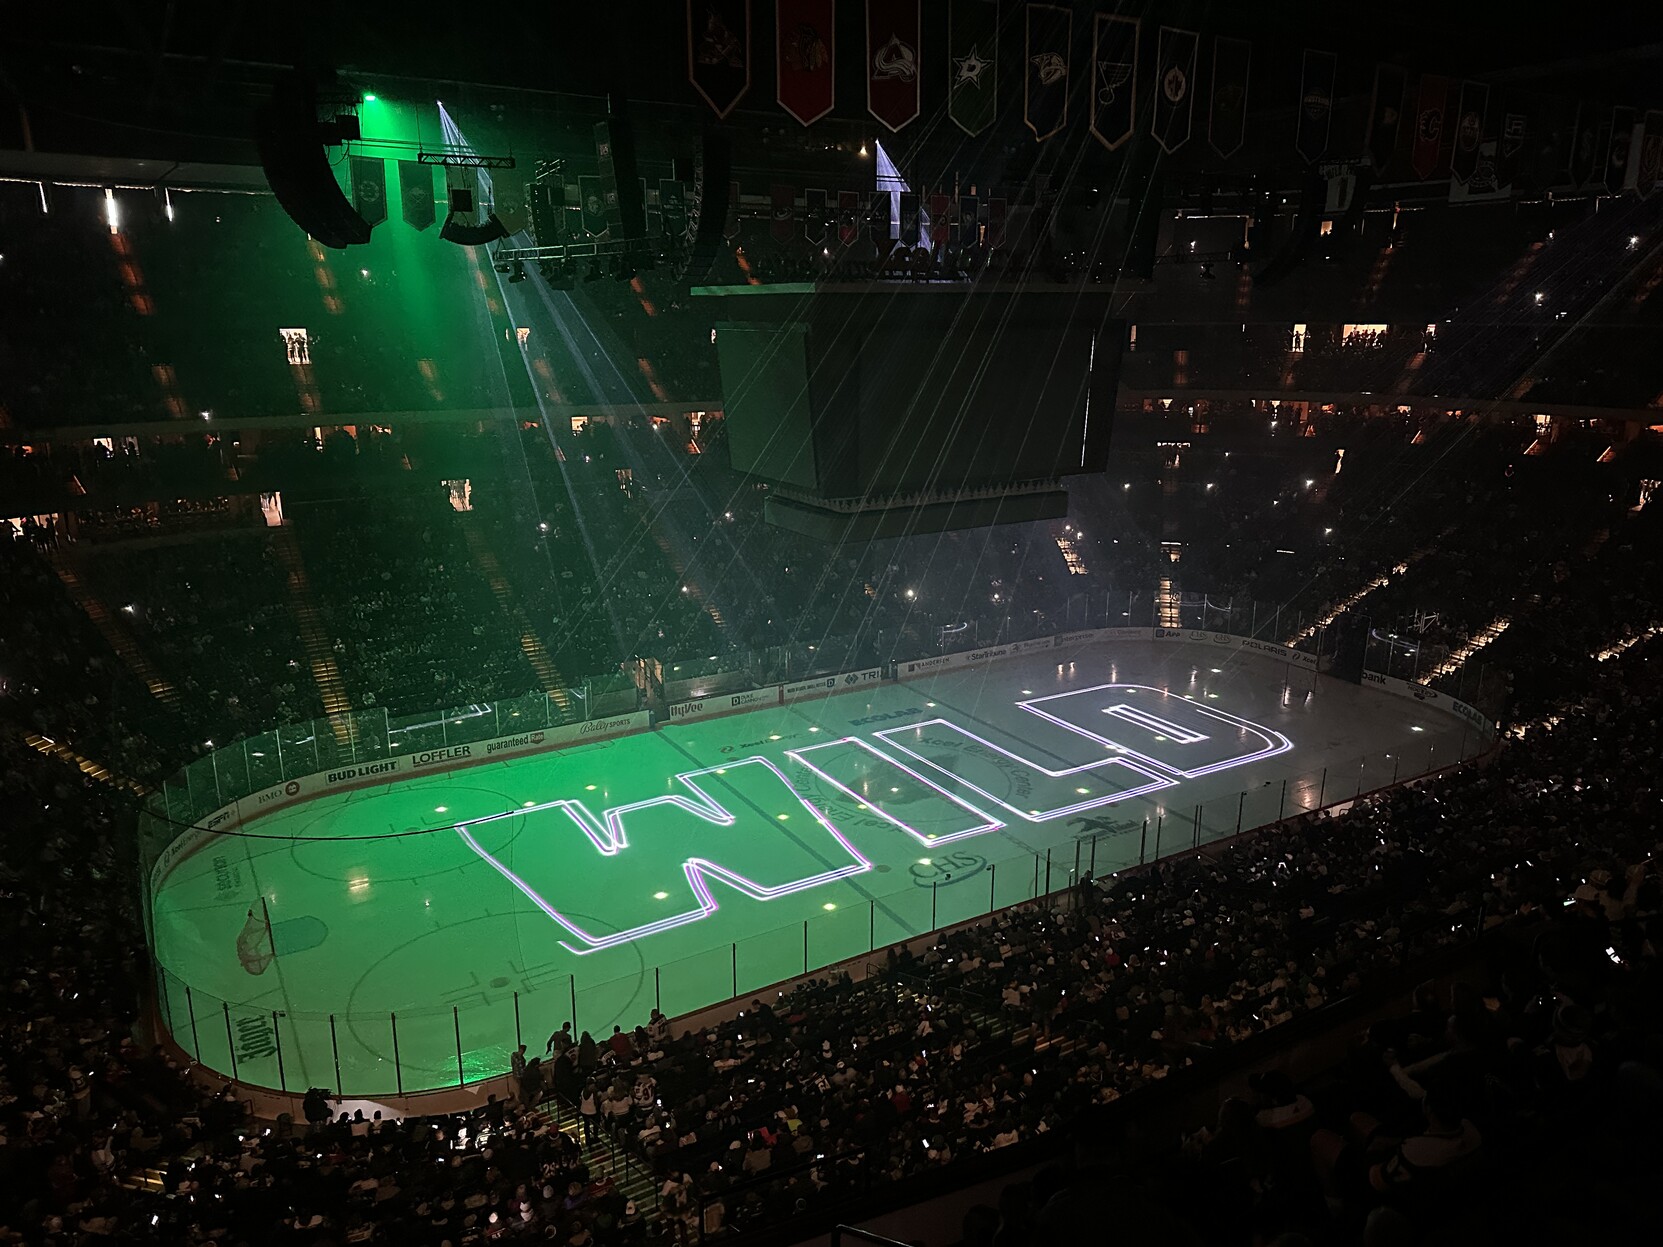 Hockey rink pre-game light show with green lasers spelling out WILD on the ice surface